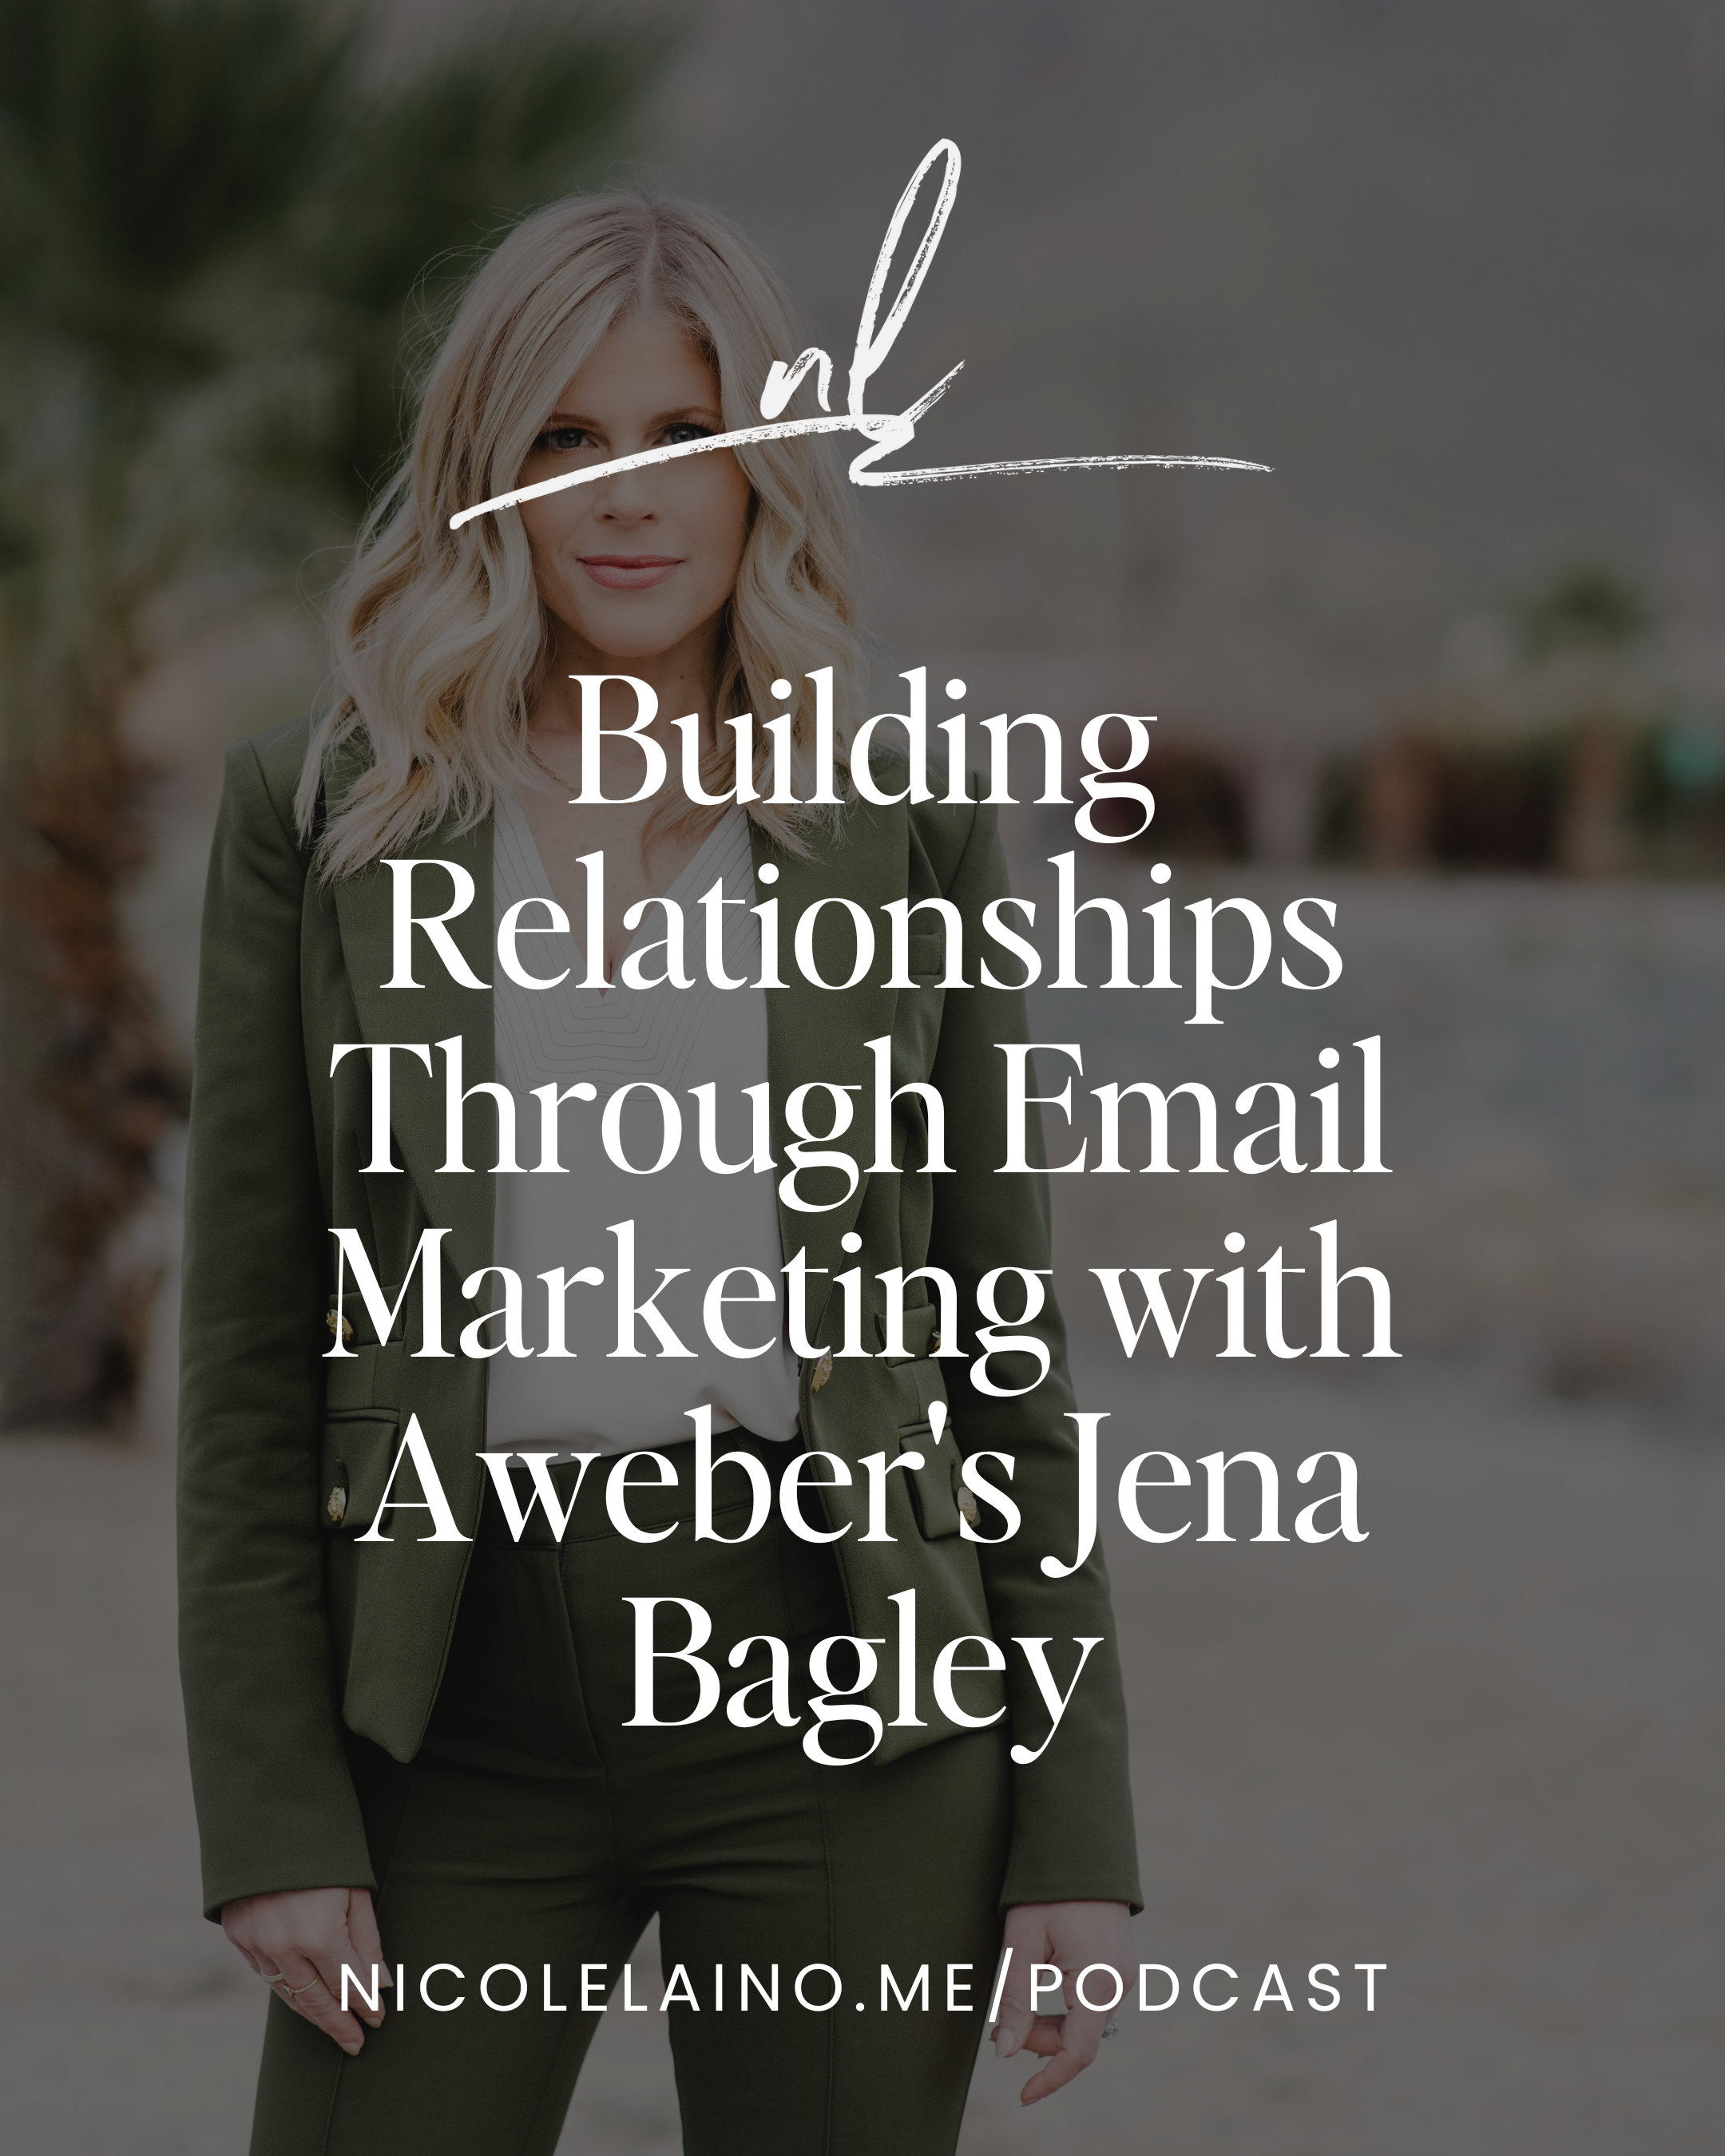 Building Relationships Through Email Marketing with Aweber's Jena Bagley